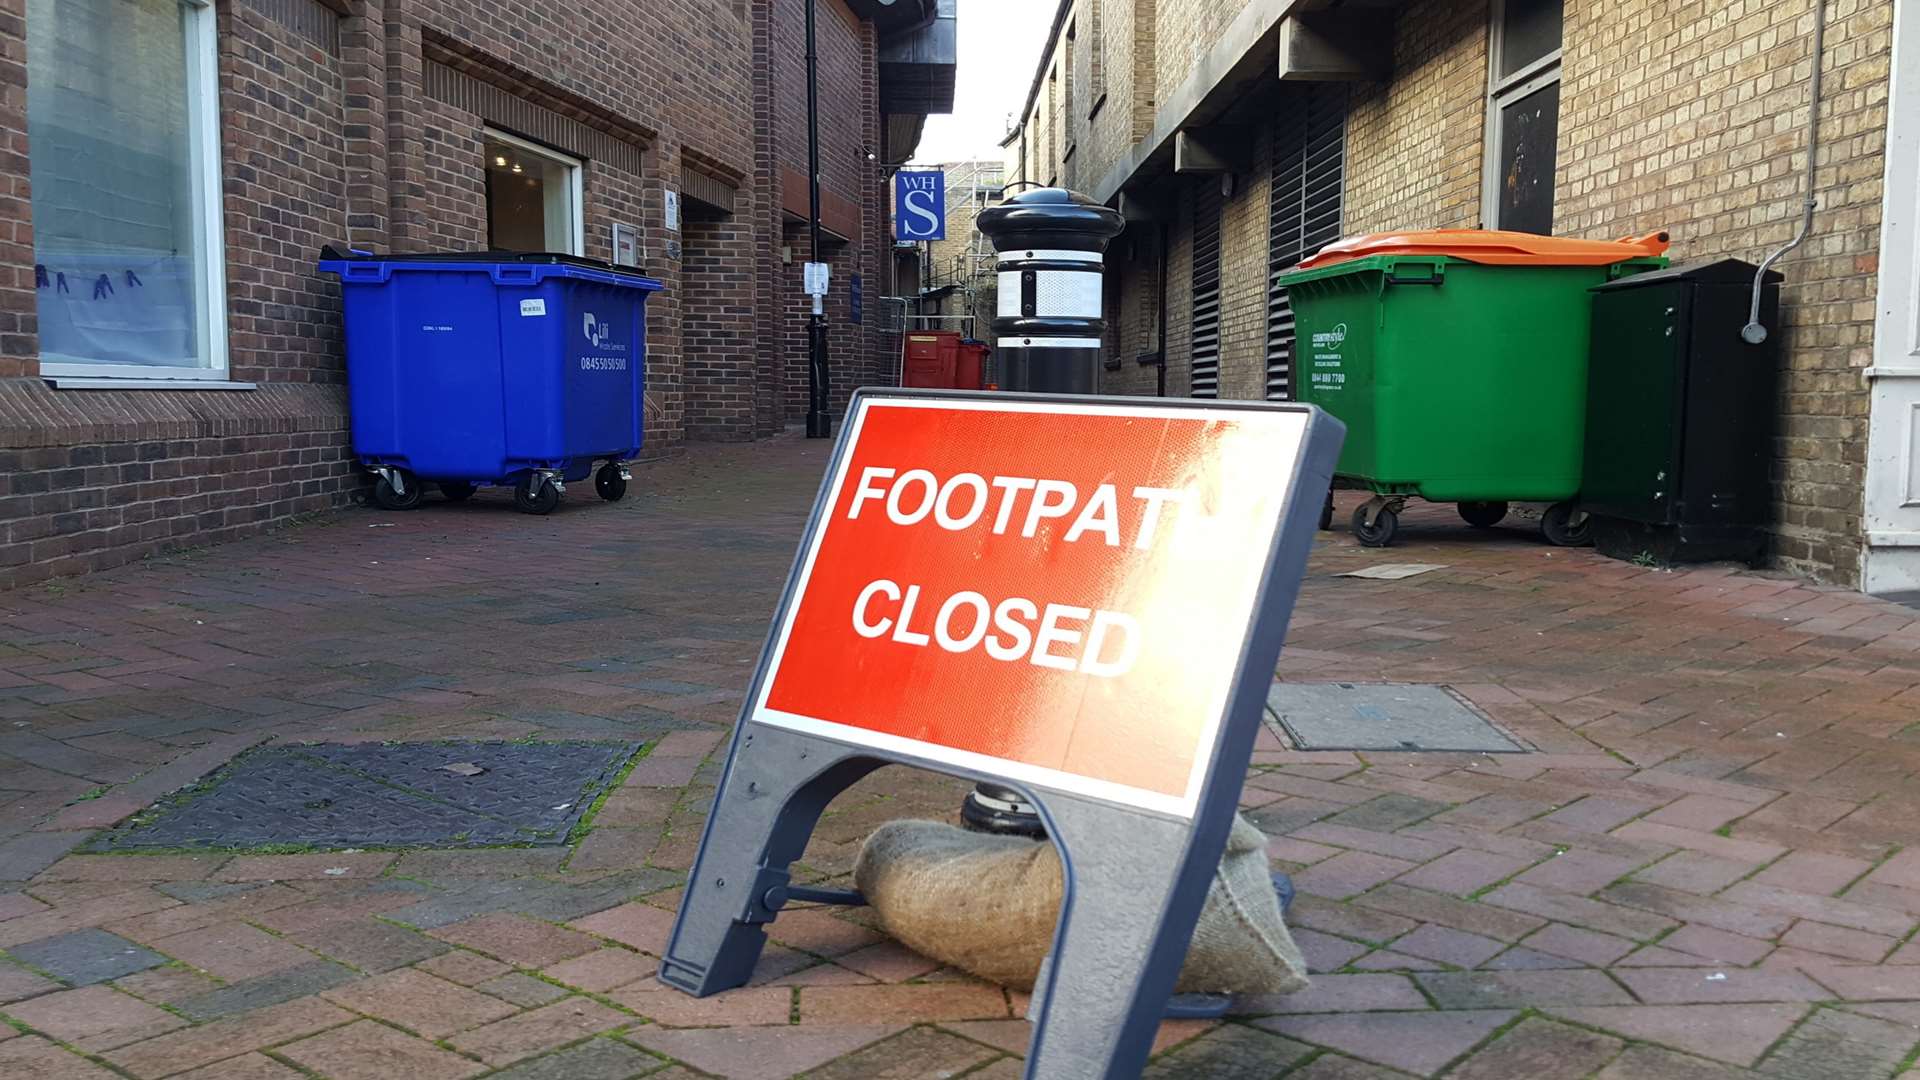 Taylors Passage in Ashford town centre has been closed